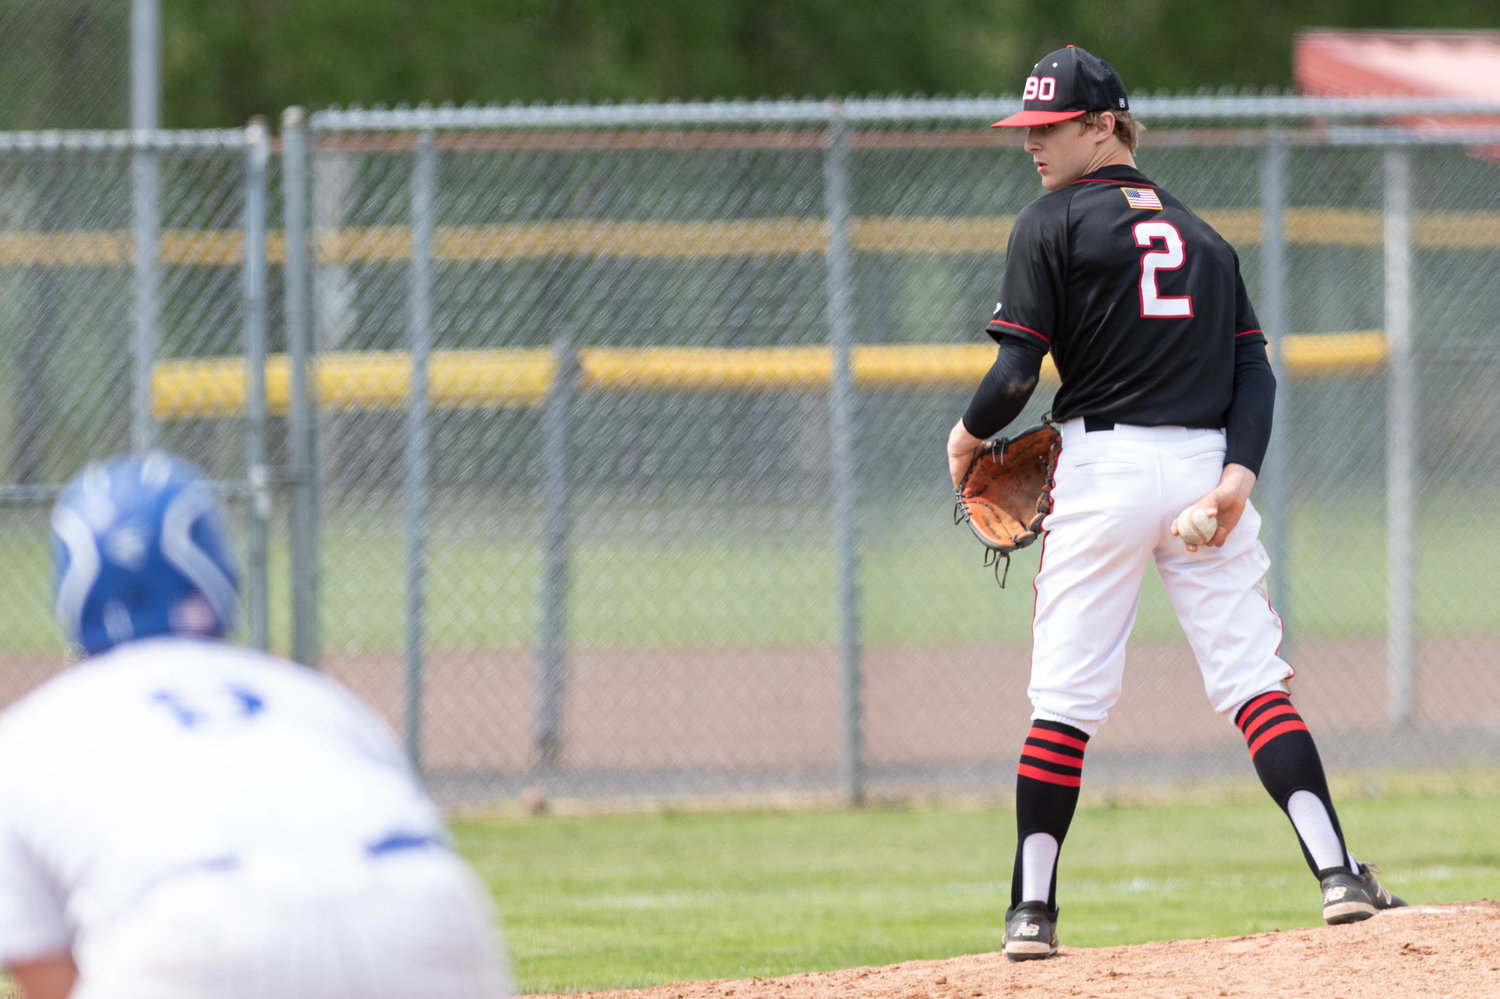 Tenino pitcher Cody Strawn eyes an Eatonville runner on first base in the 1A District 4 playoffs at Castle Rock May 13.